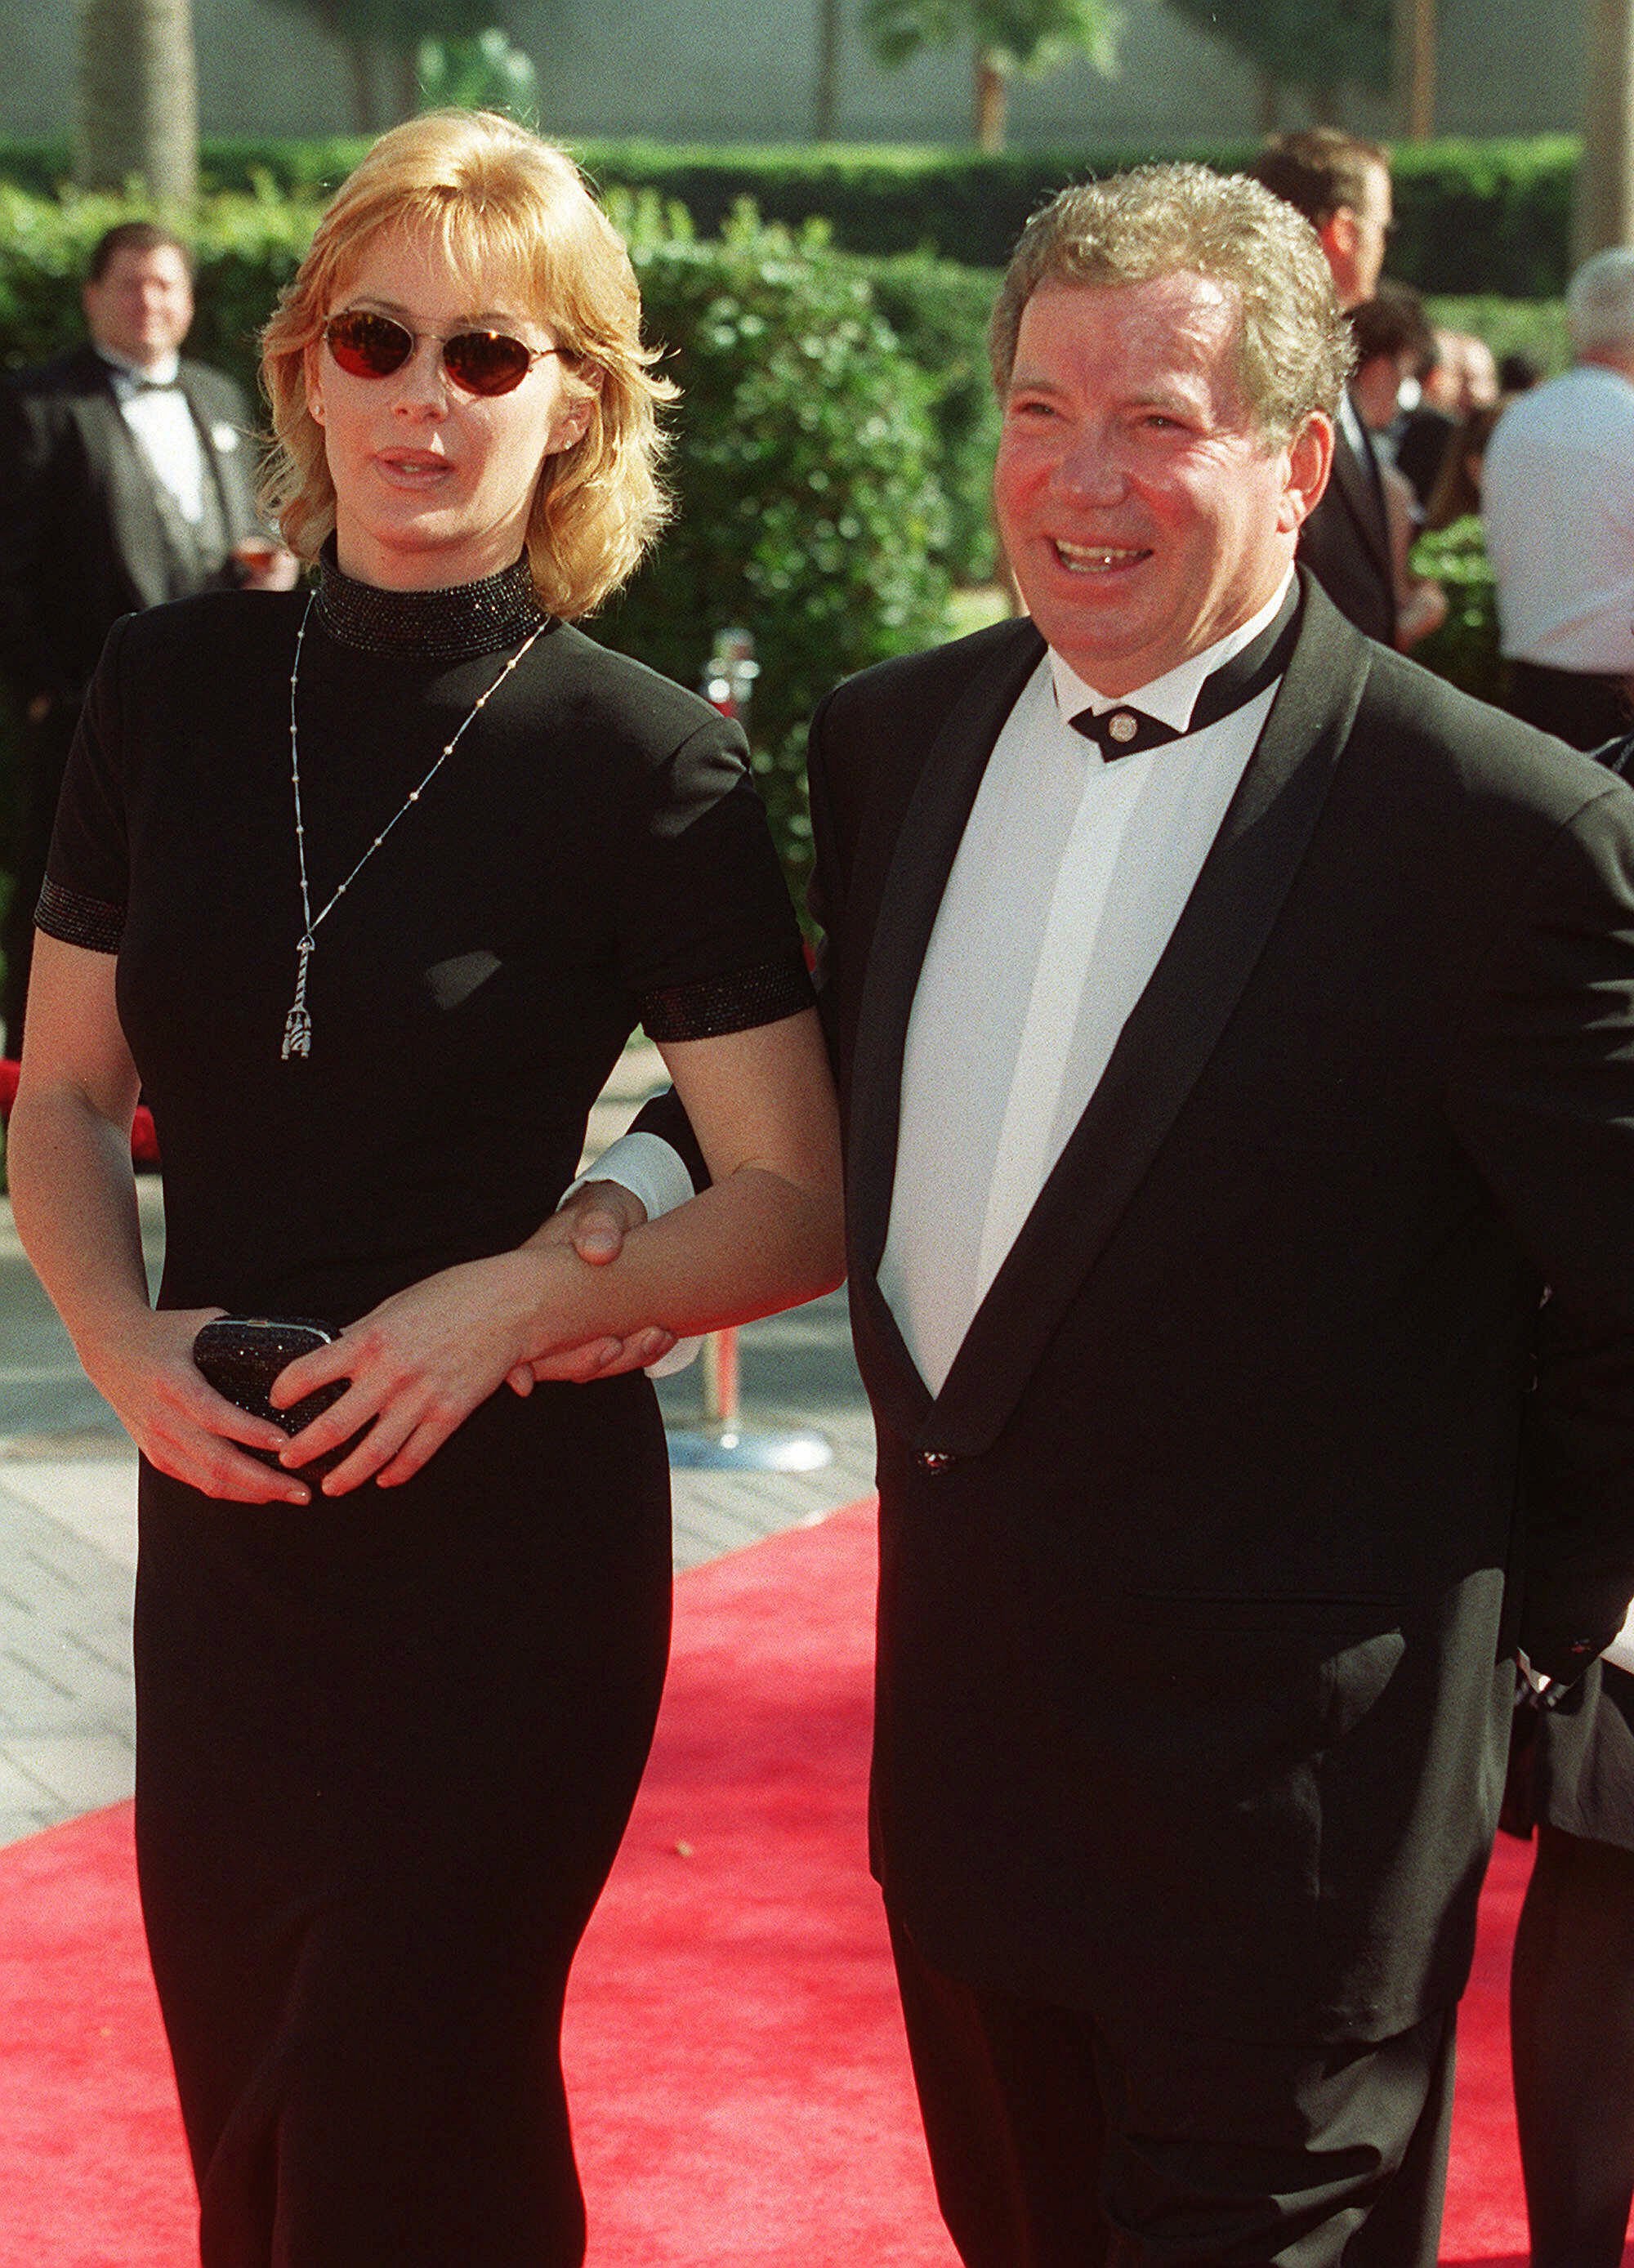 William Shatner and his wife Nerine Kidd attending an event in 1998.